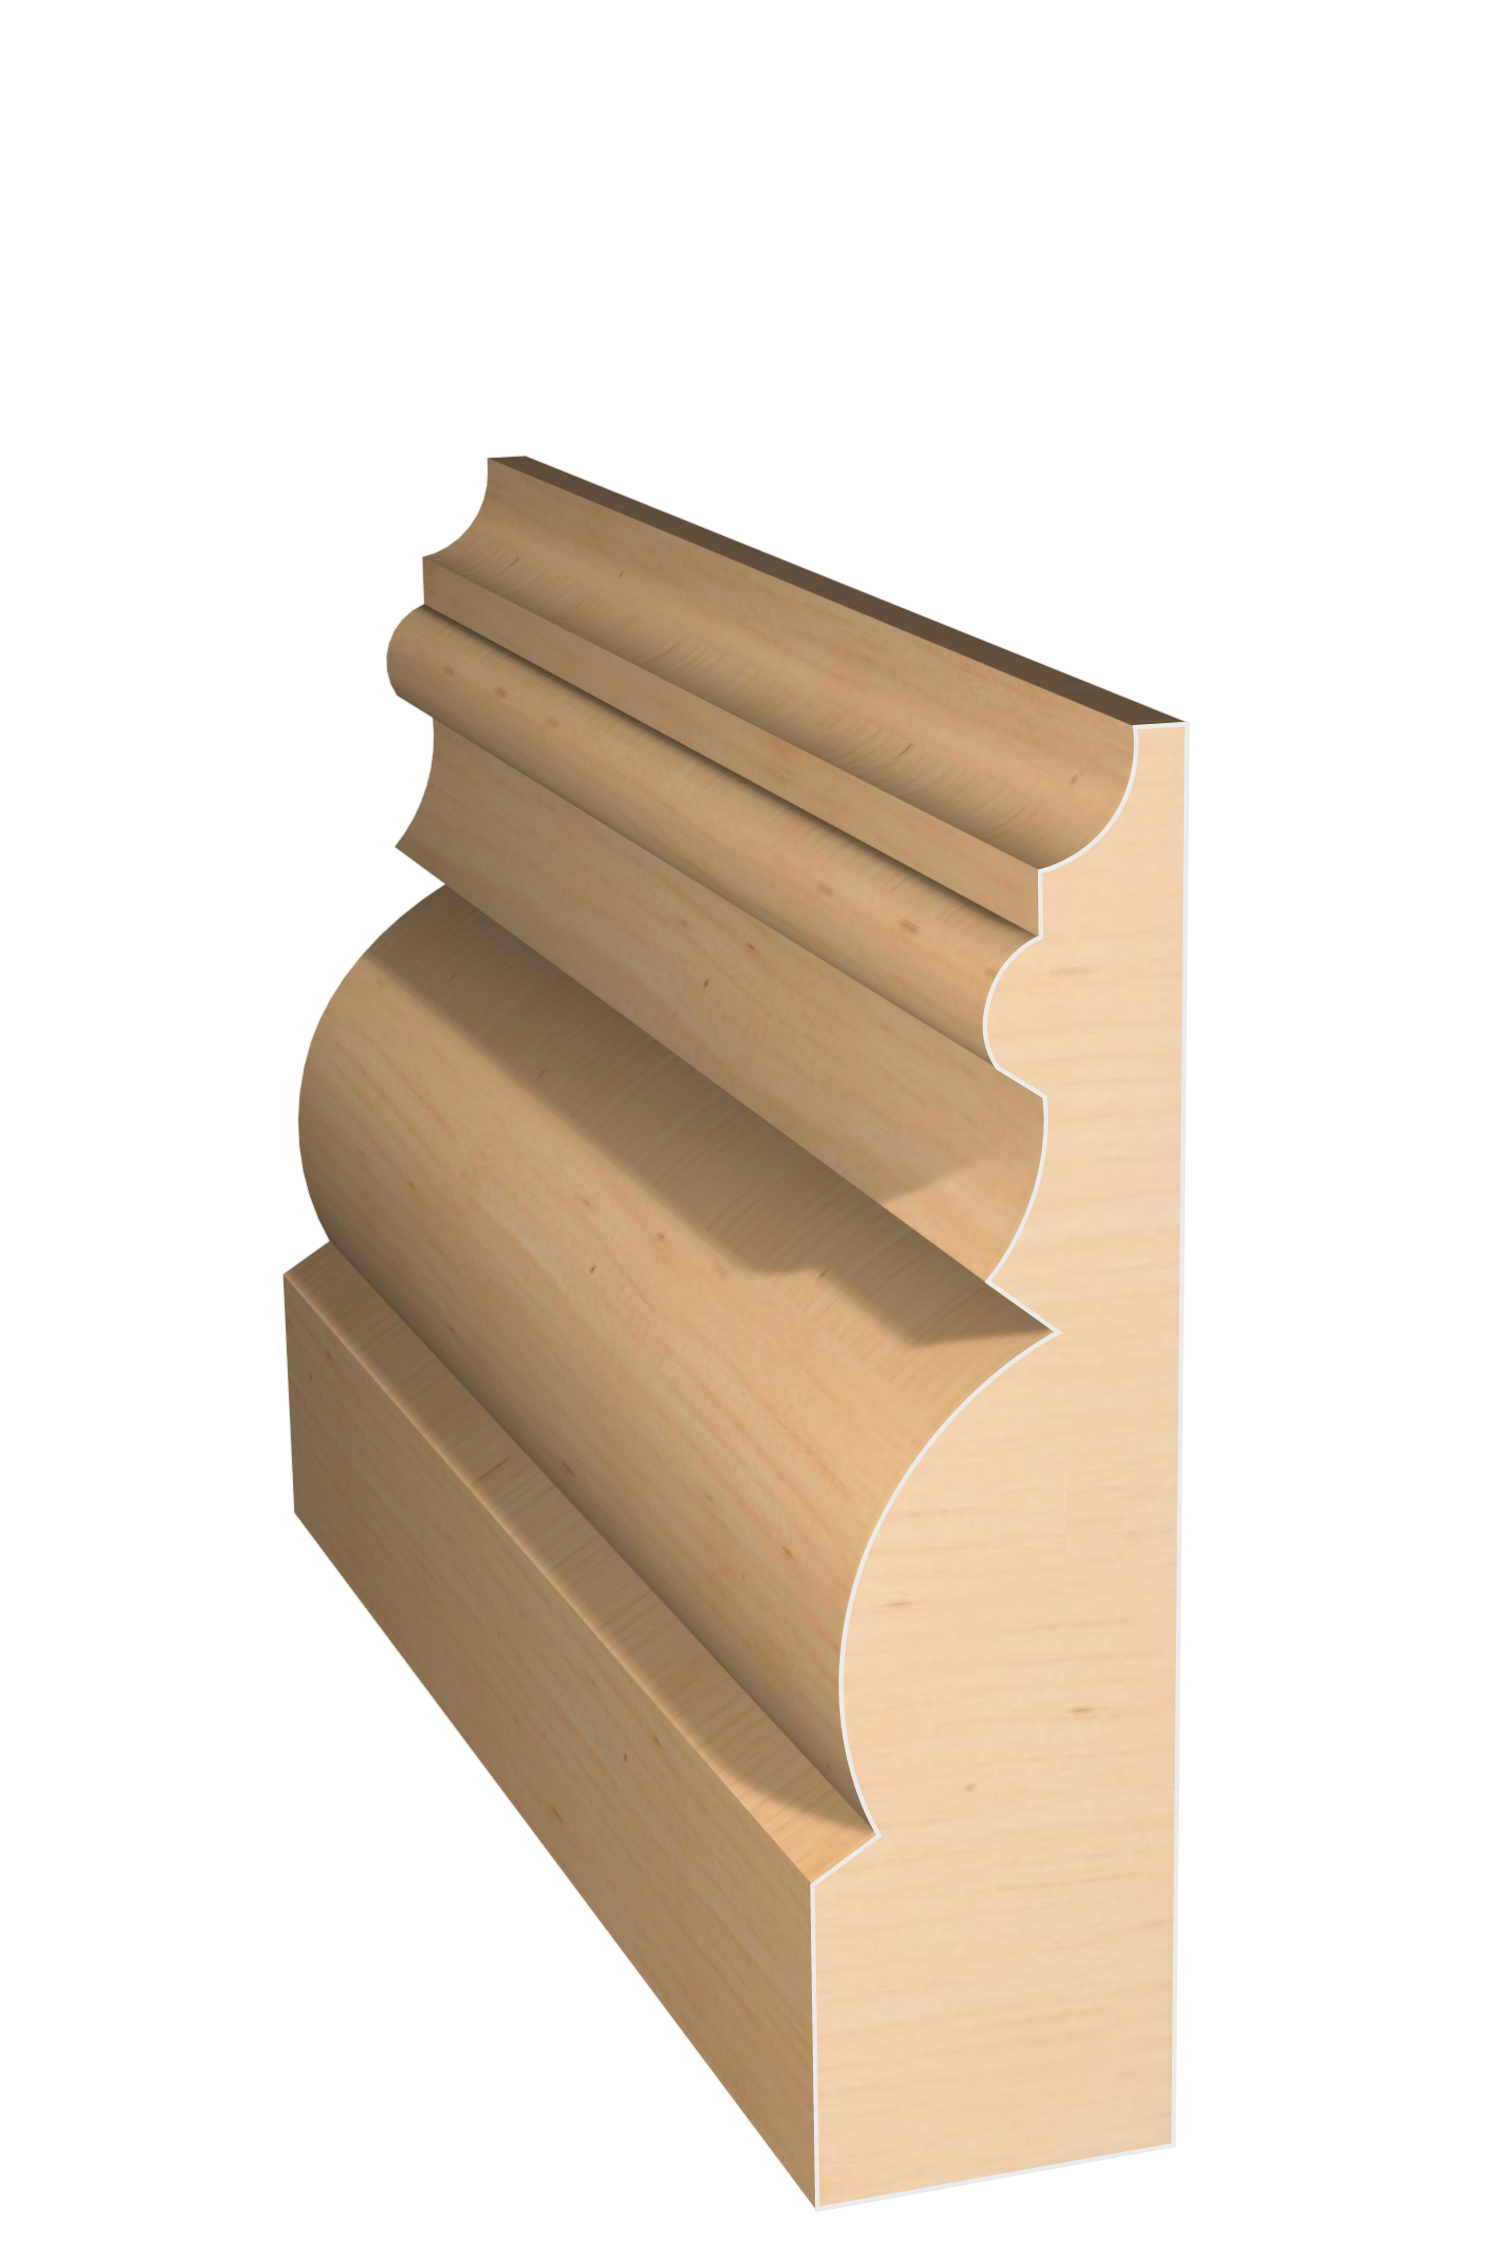 Three dimensional rendering of custom base wood molding BAPL413 made by Public Lumber Company in Detroit.